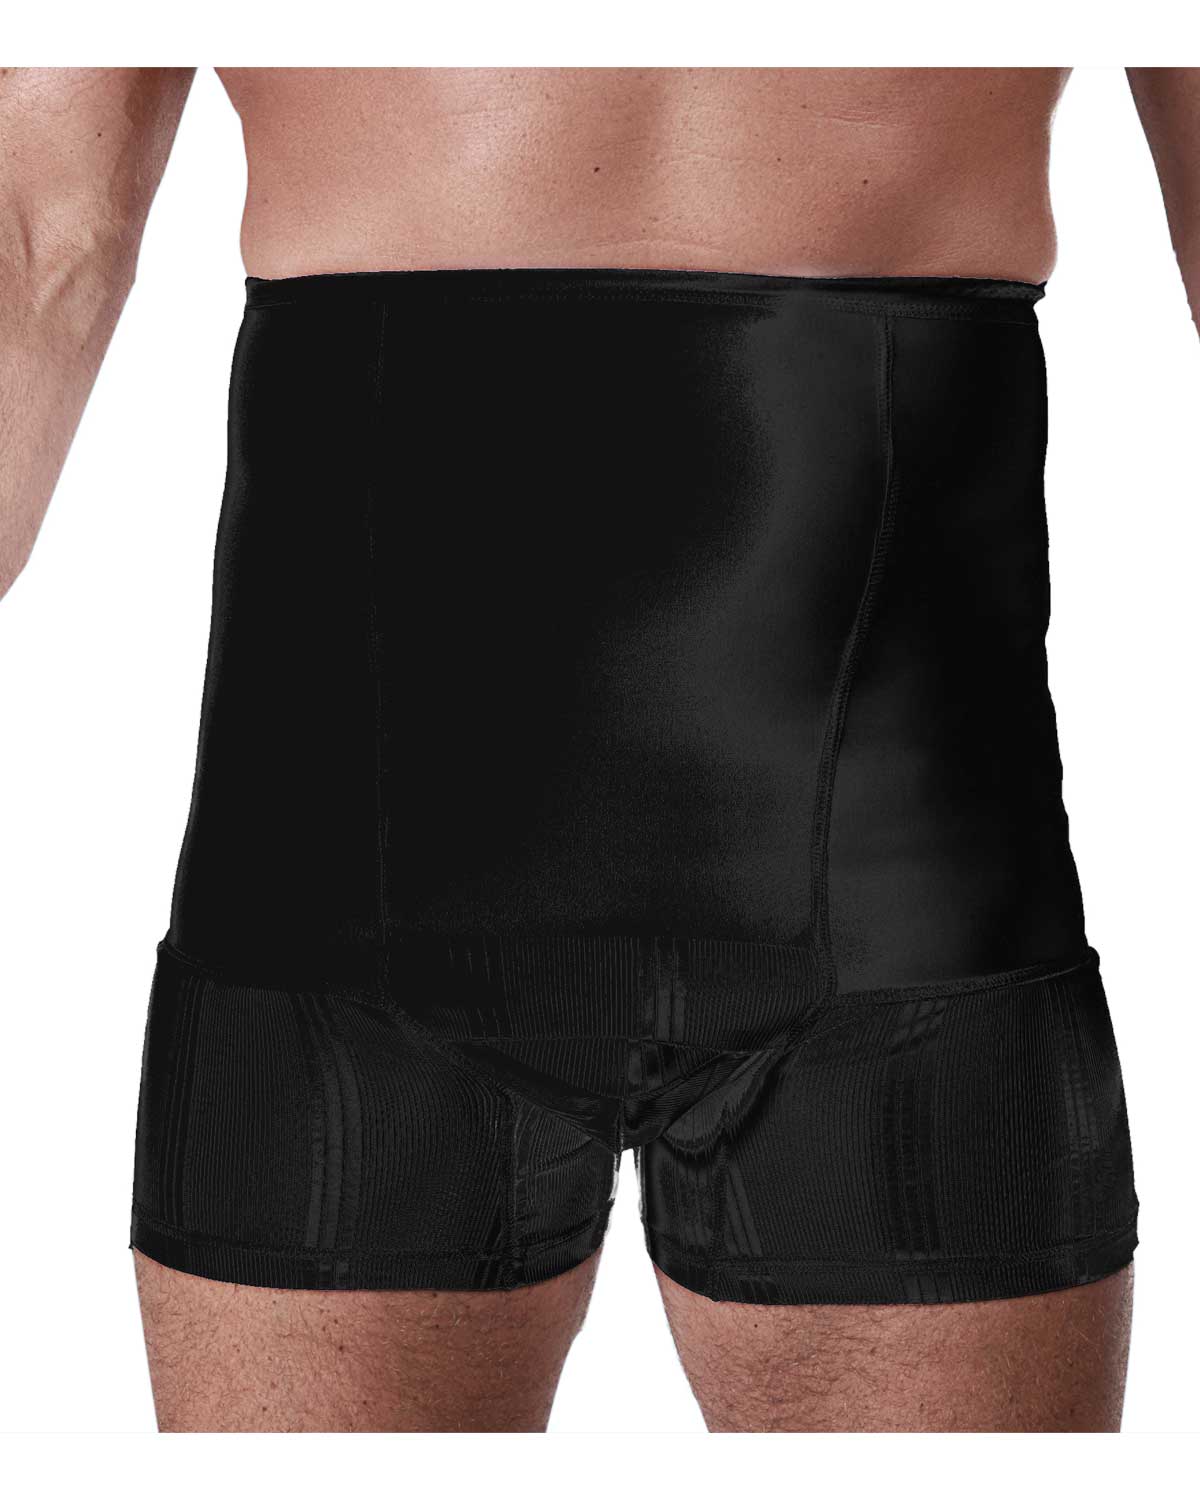 CUI Mens Hernia Low Waist Support Girdle With Legs - 1 each, XSMALL, BLACK-1